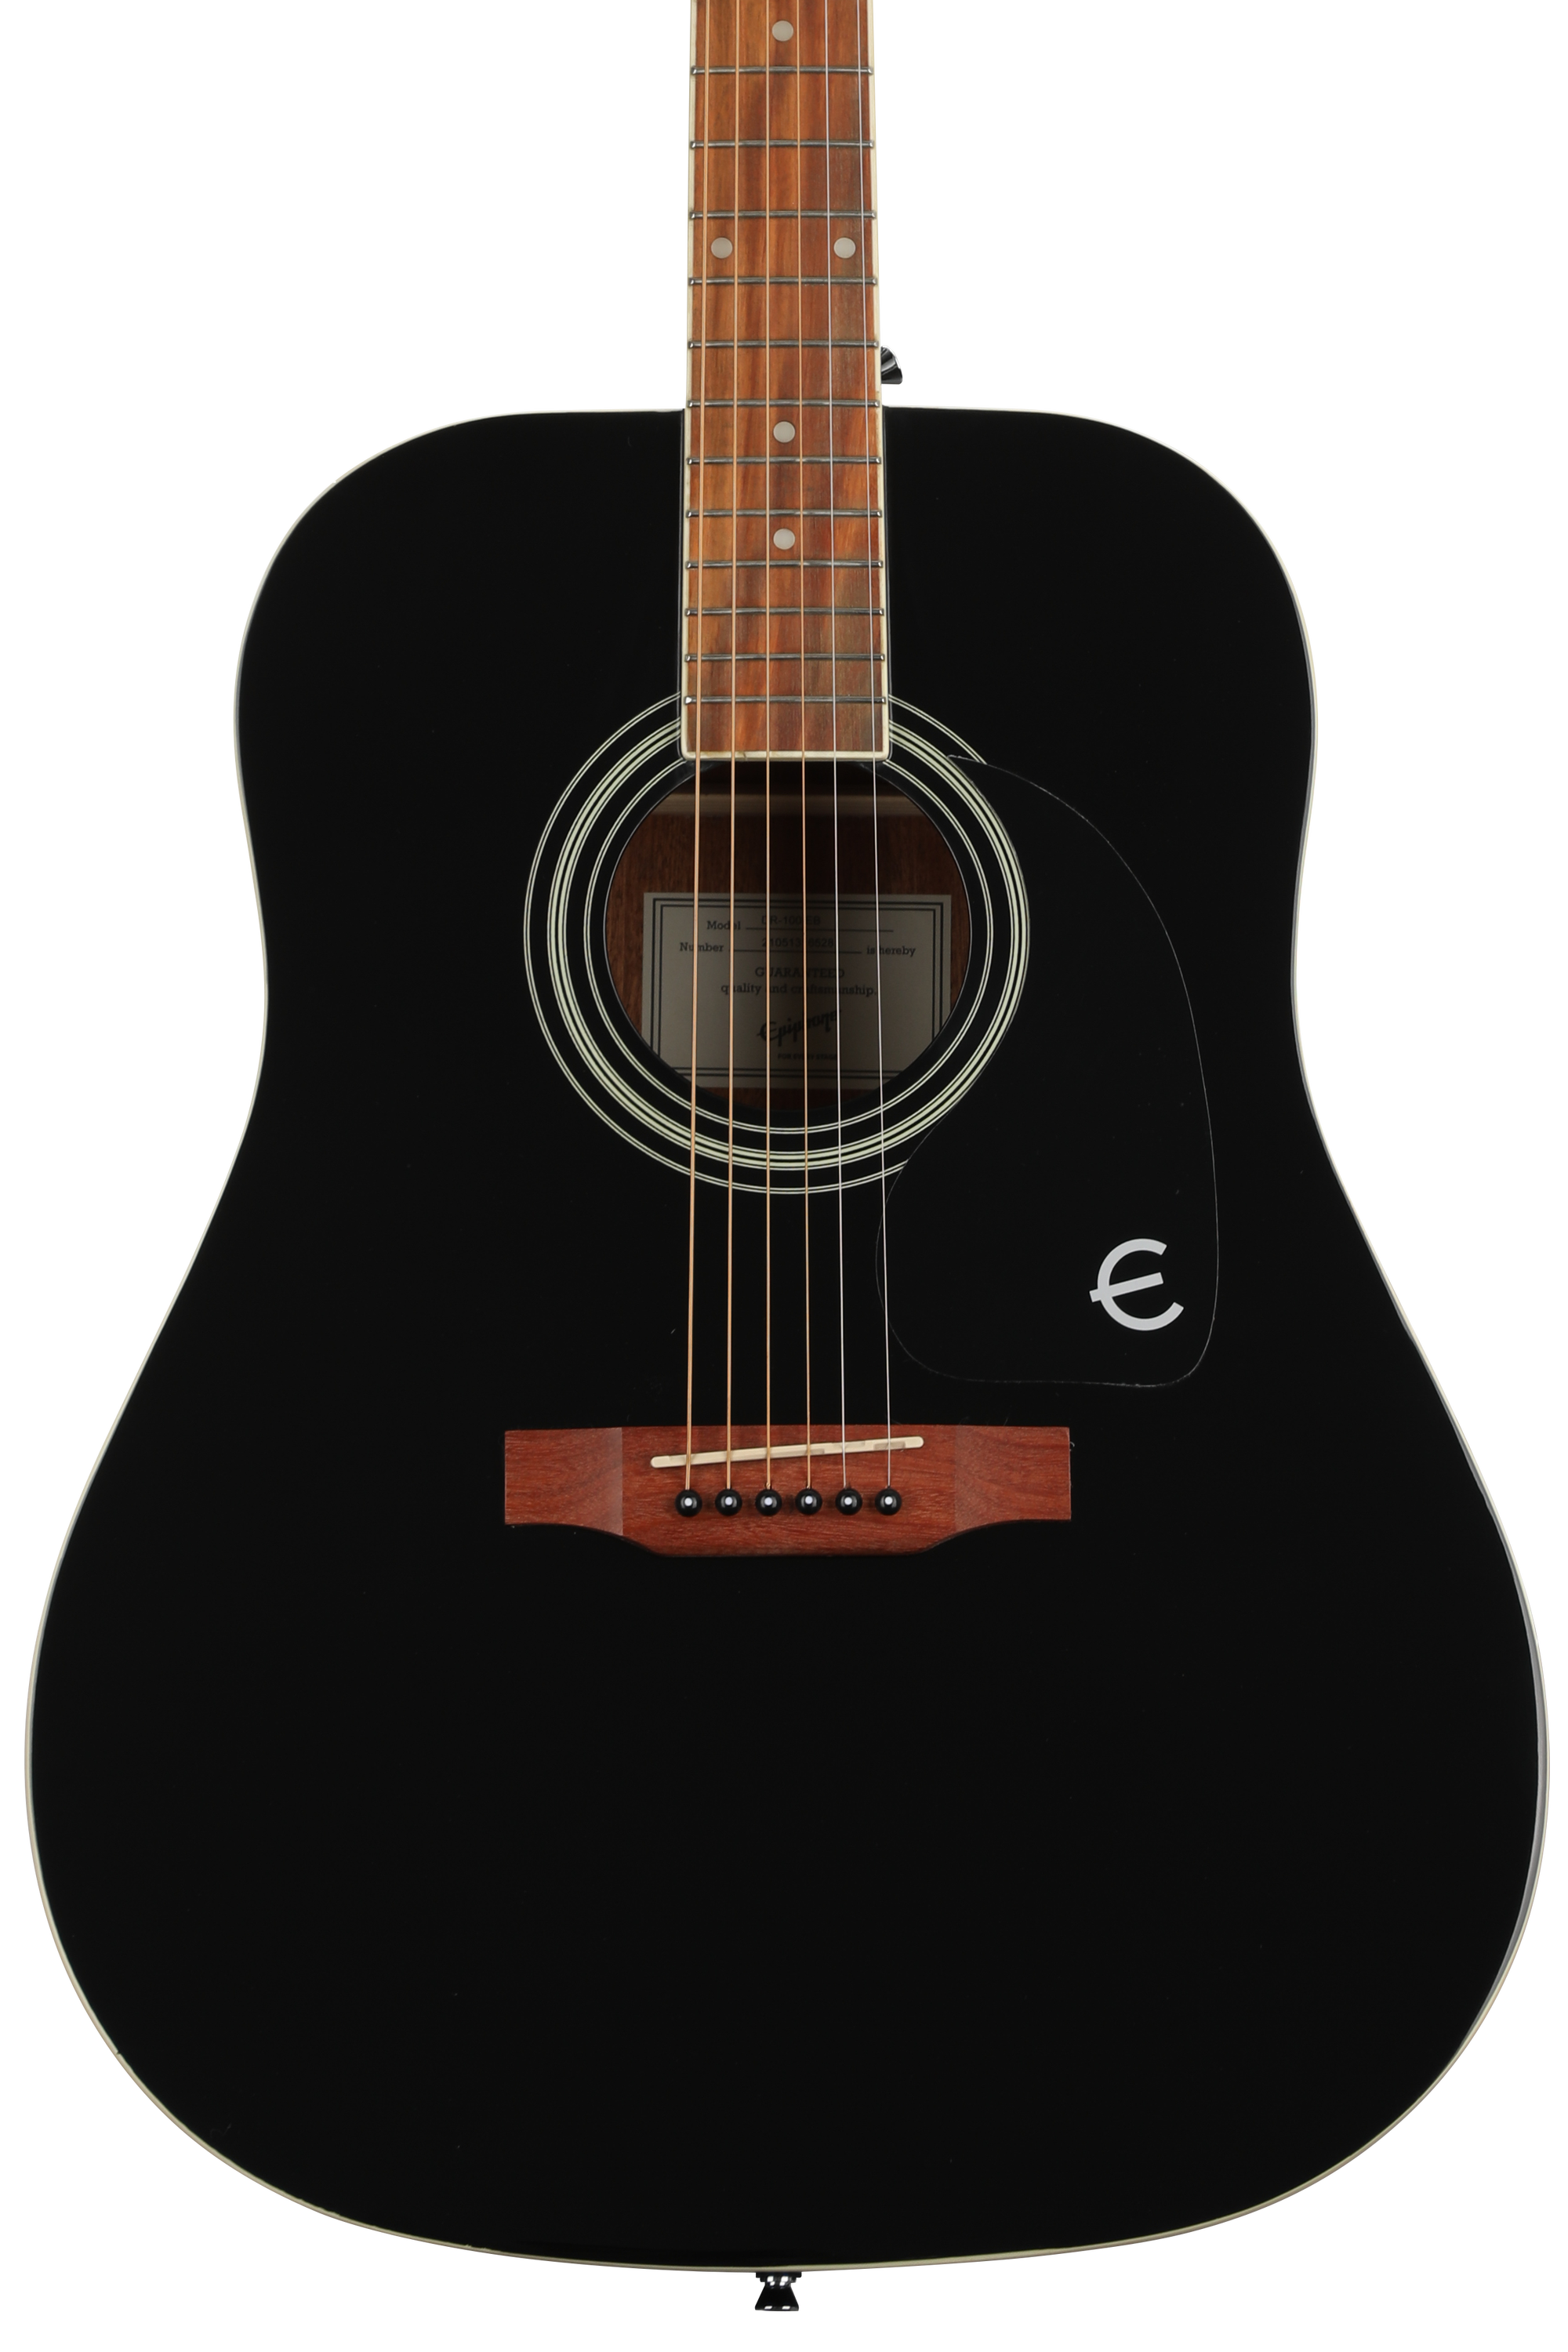 Epiphone DR-100 Dreadnought Acoustic Guitar - Ebony | Sweetwater